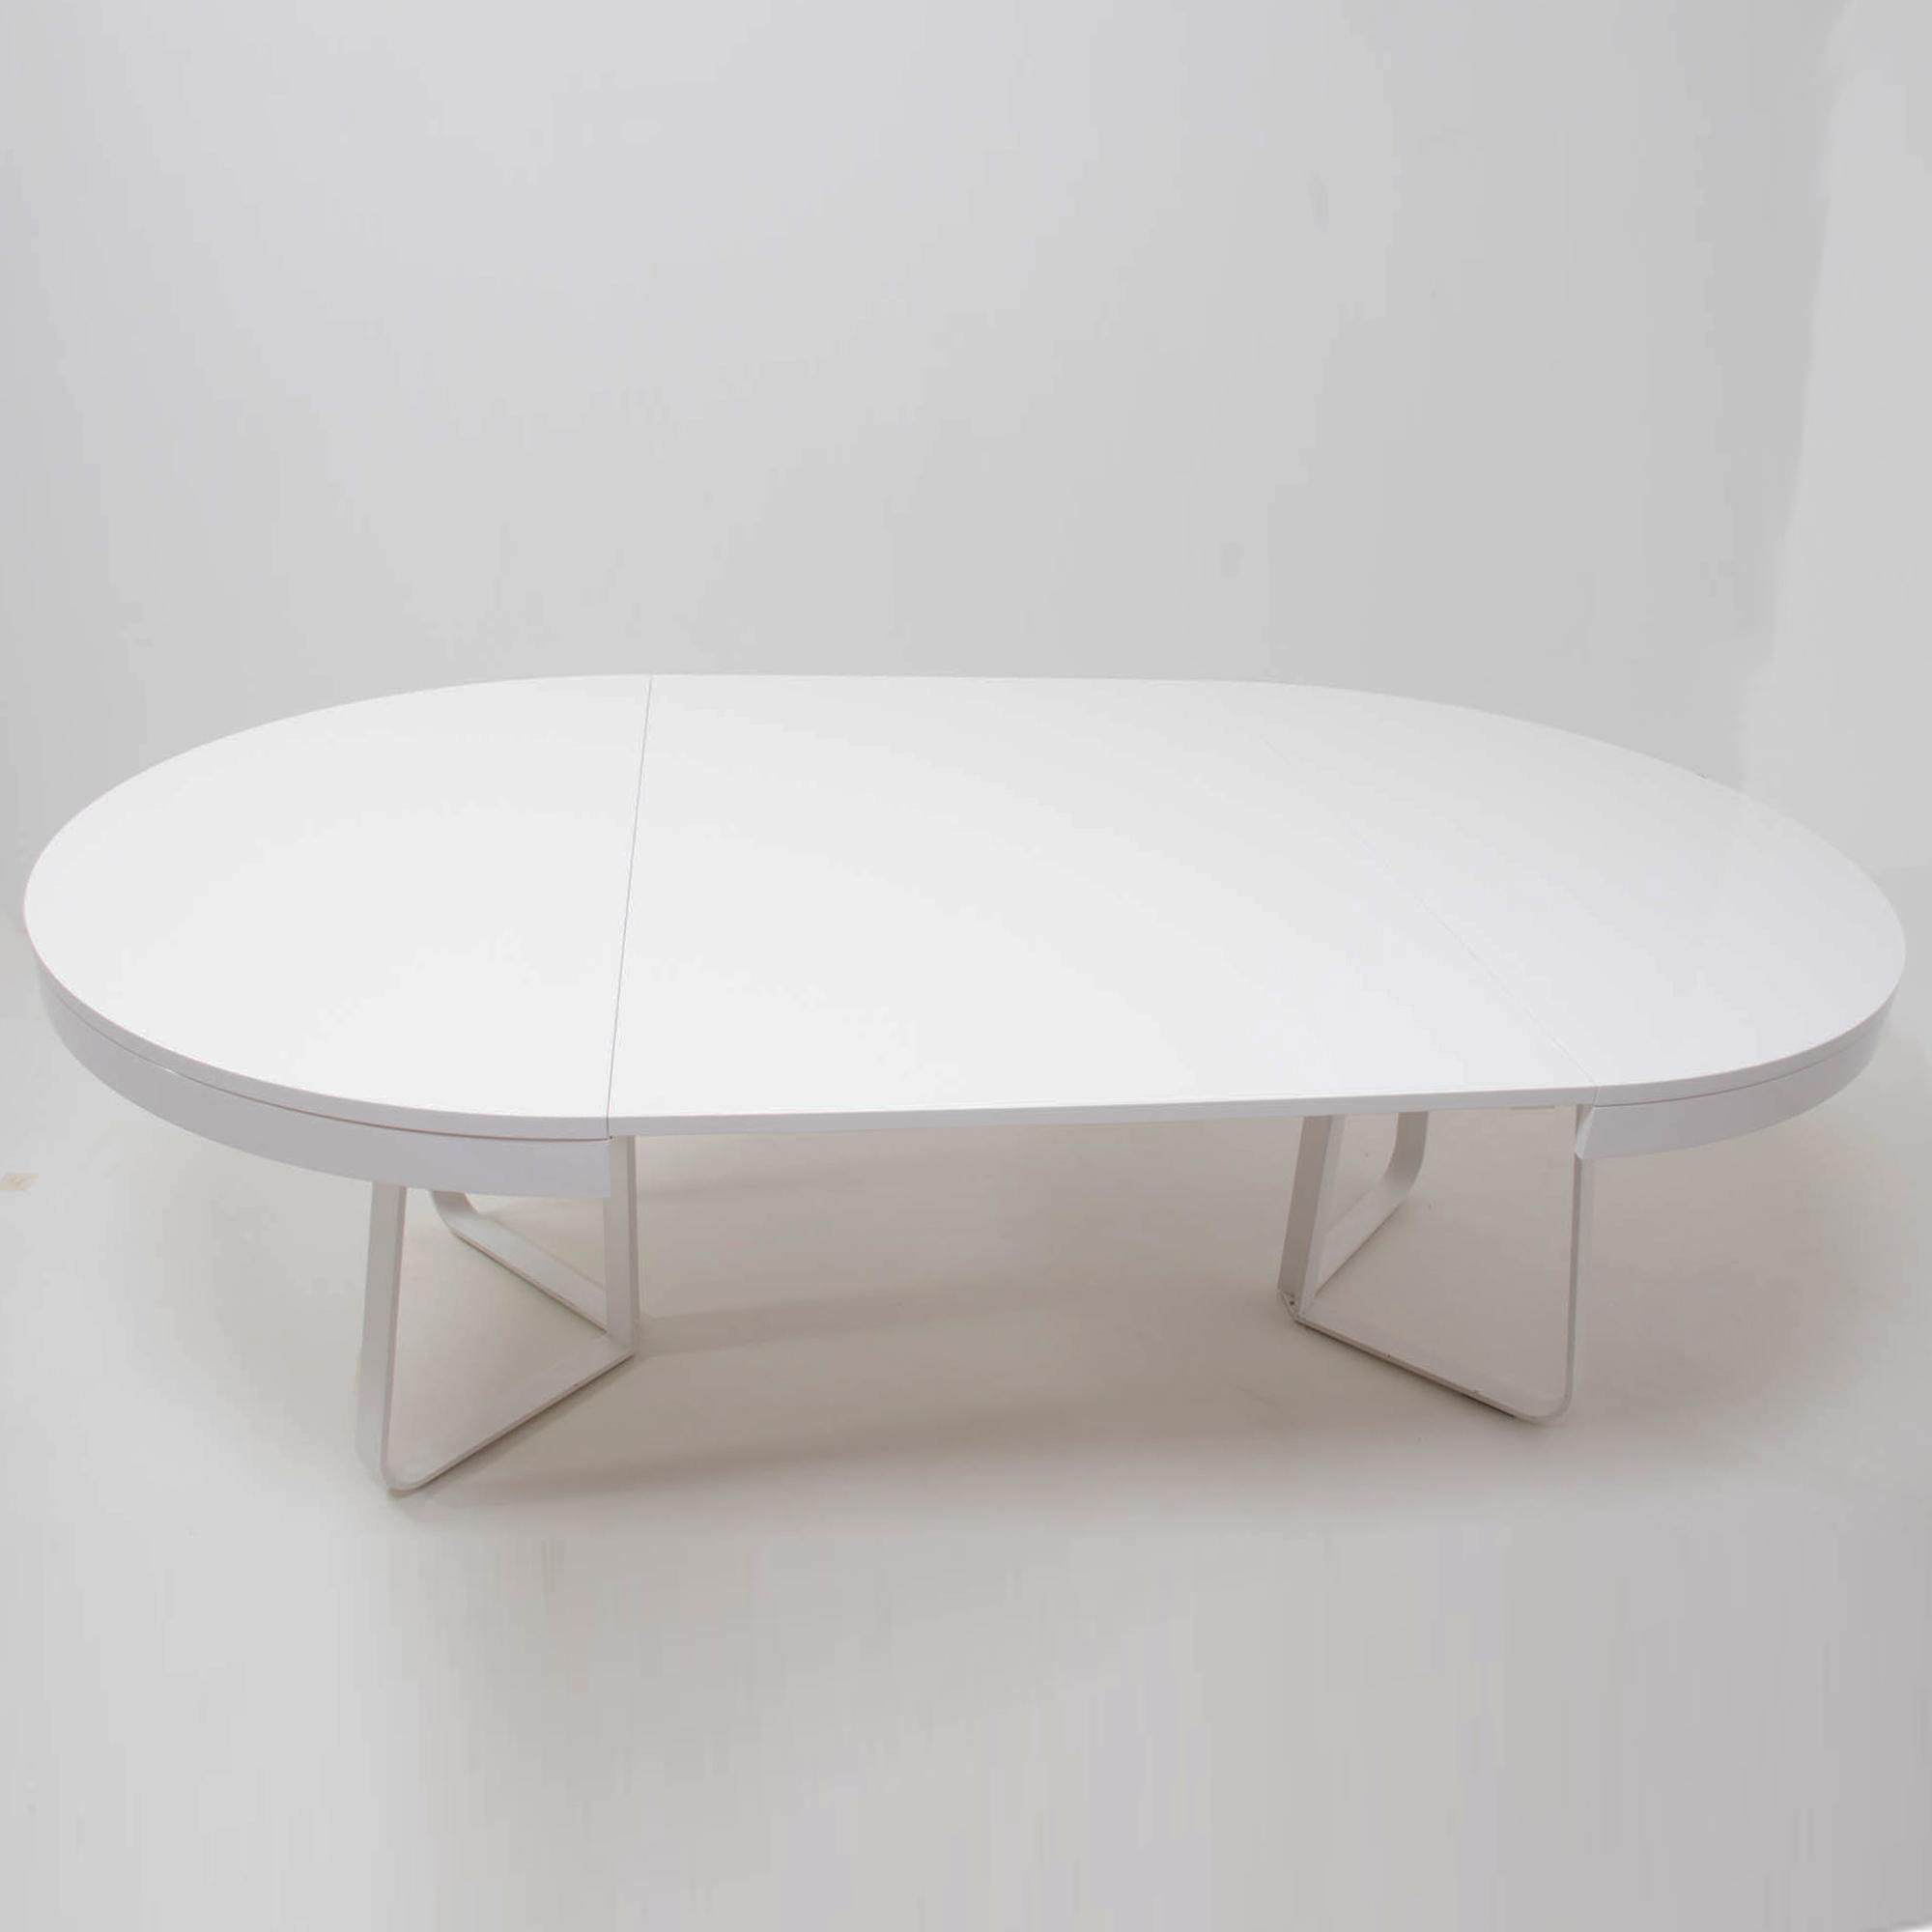 French Ligne Roset by Thibault Desombre, Ava White Round to Oval Extending Dining Table